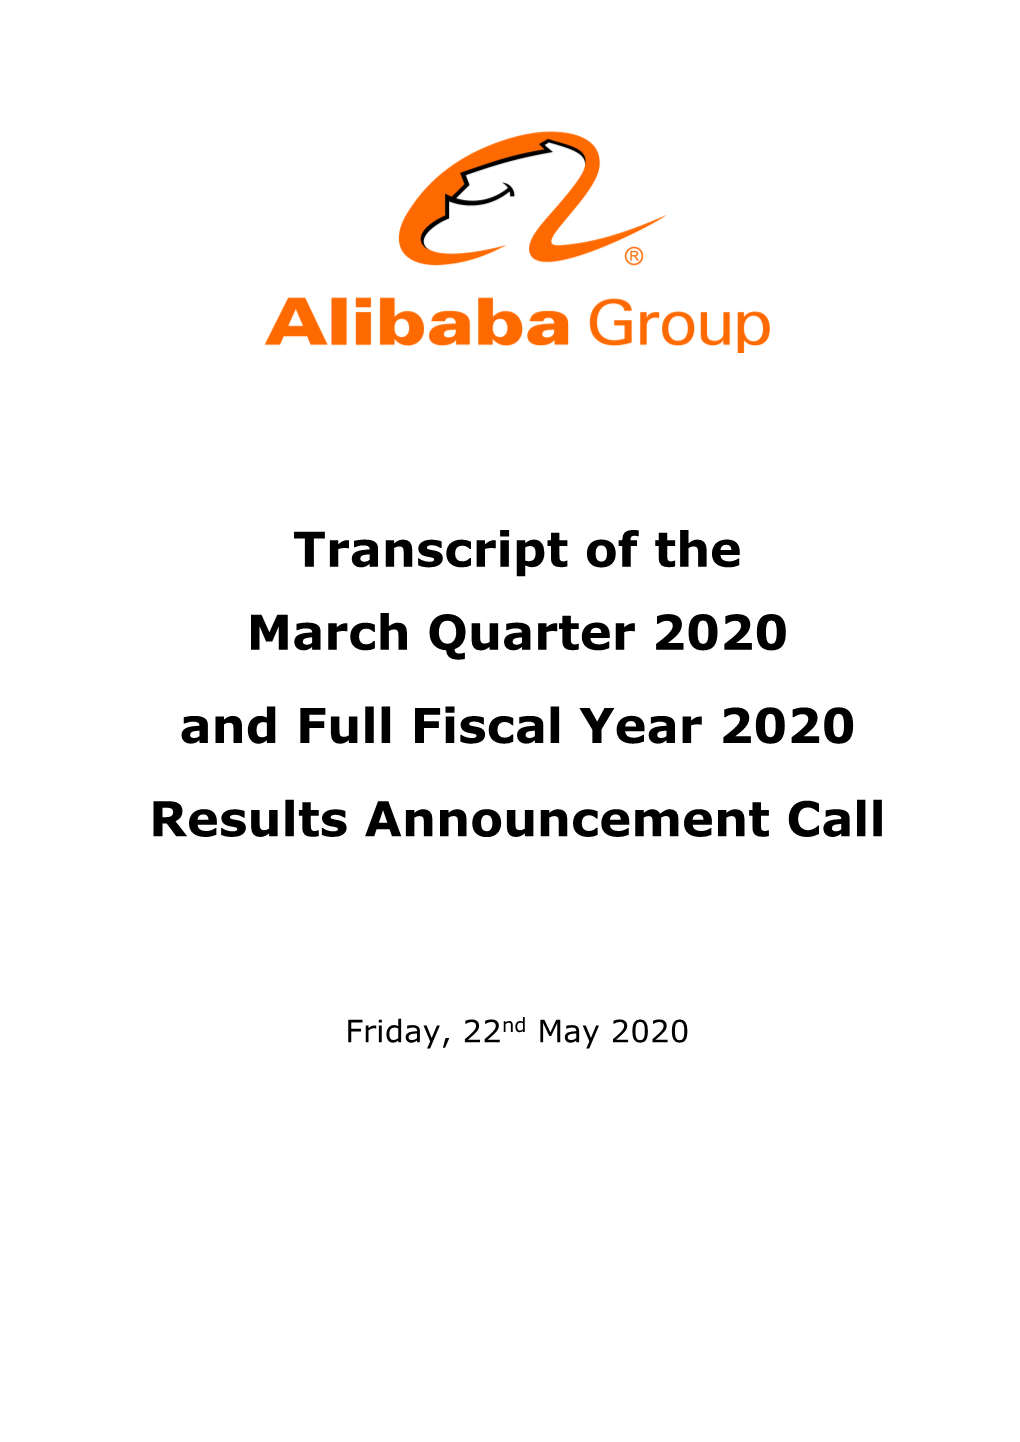 Transcript of the March Quarter 2020 and Full Fiscal Year 2020